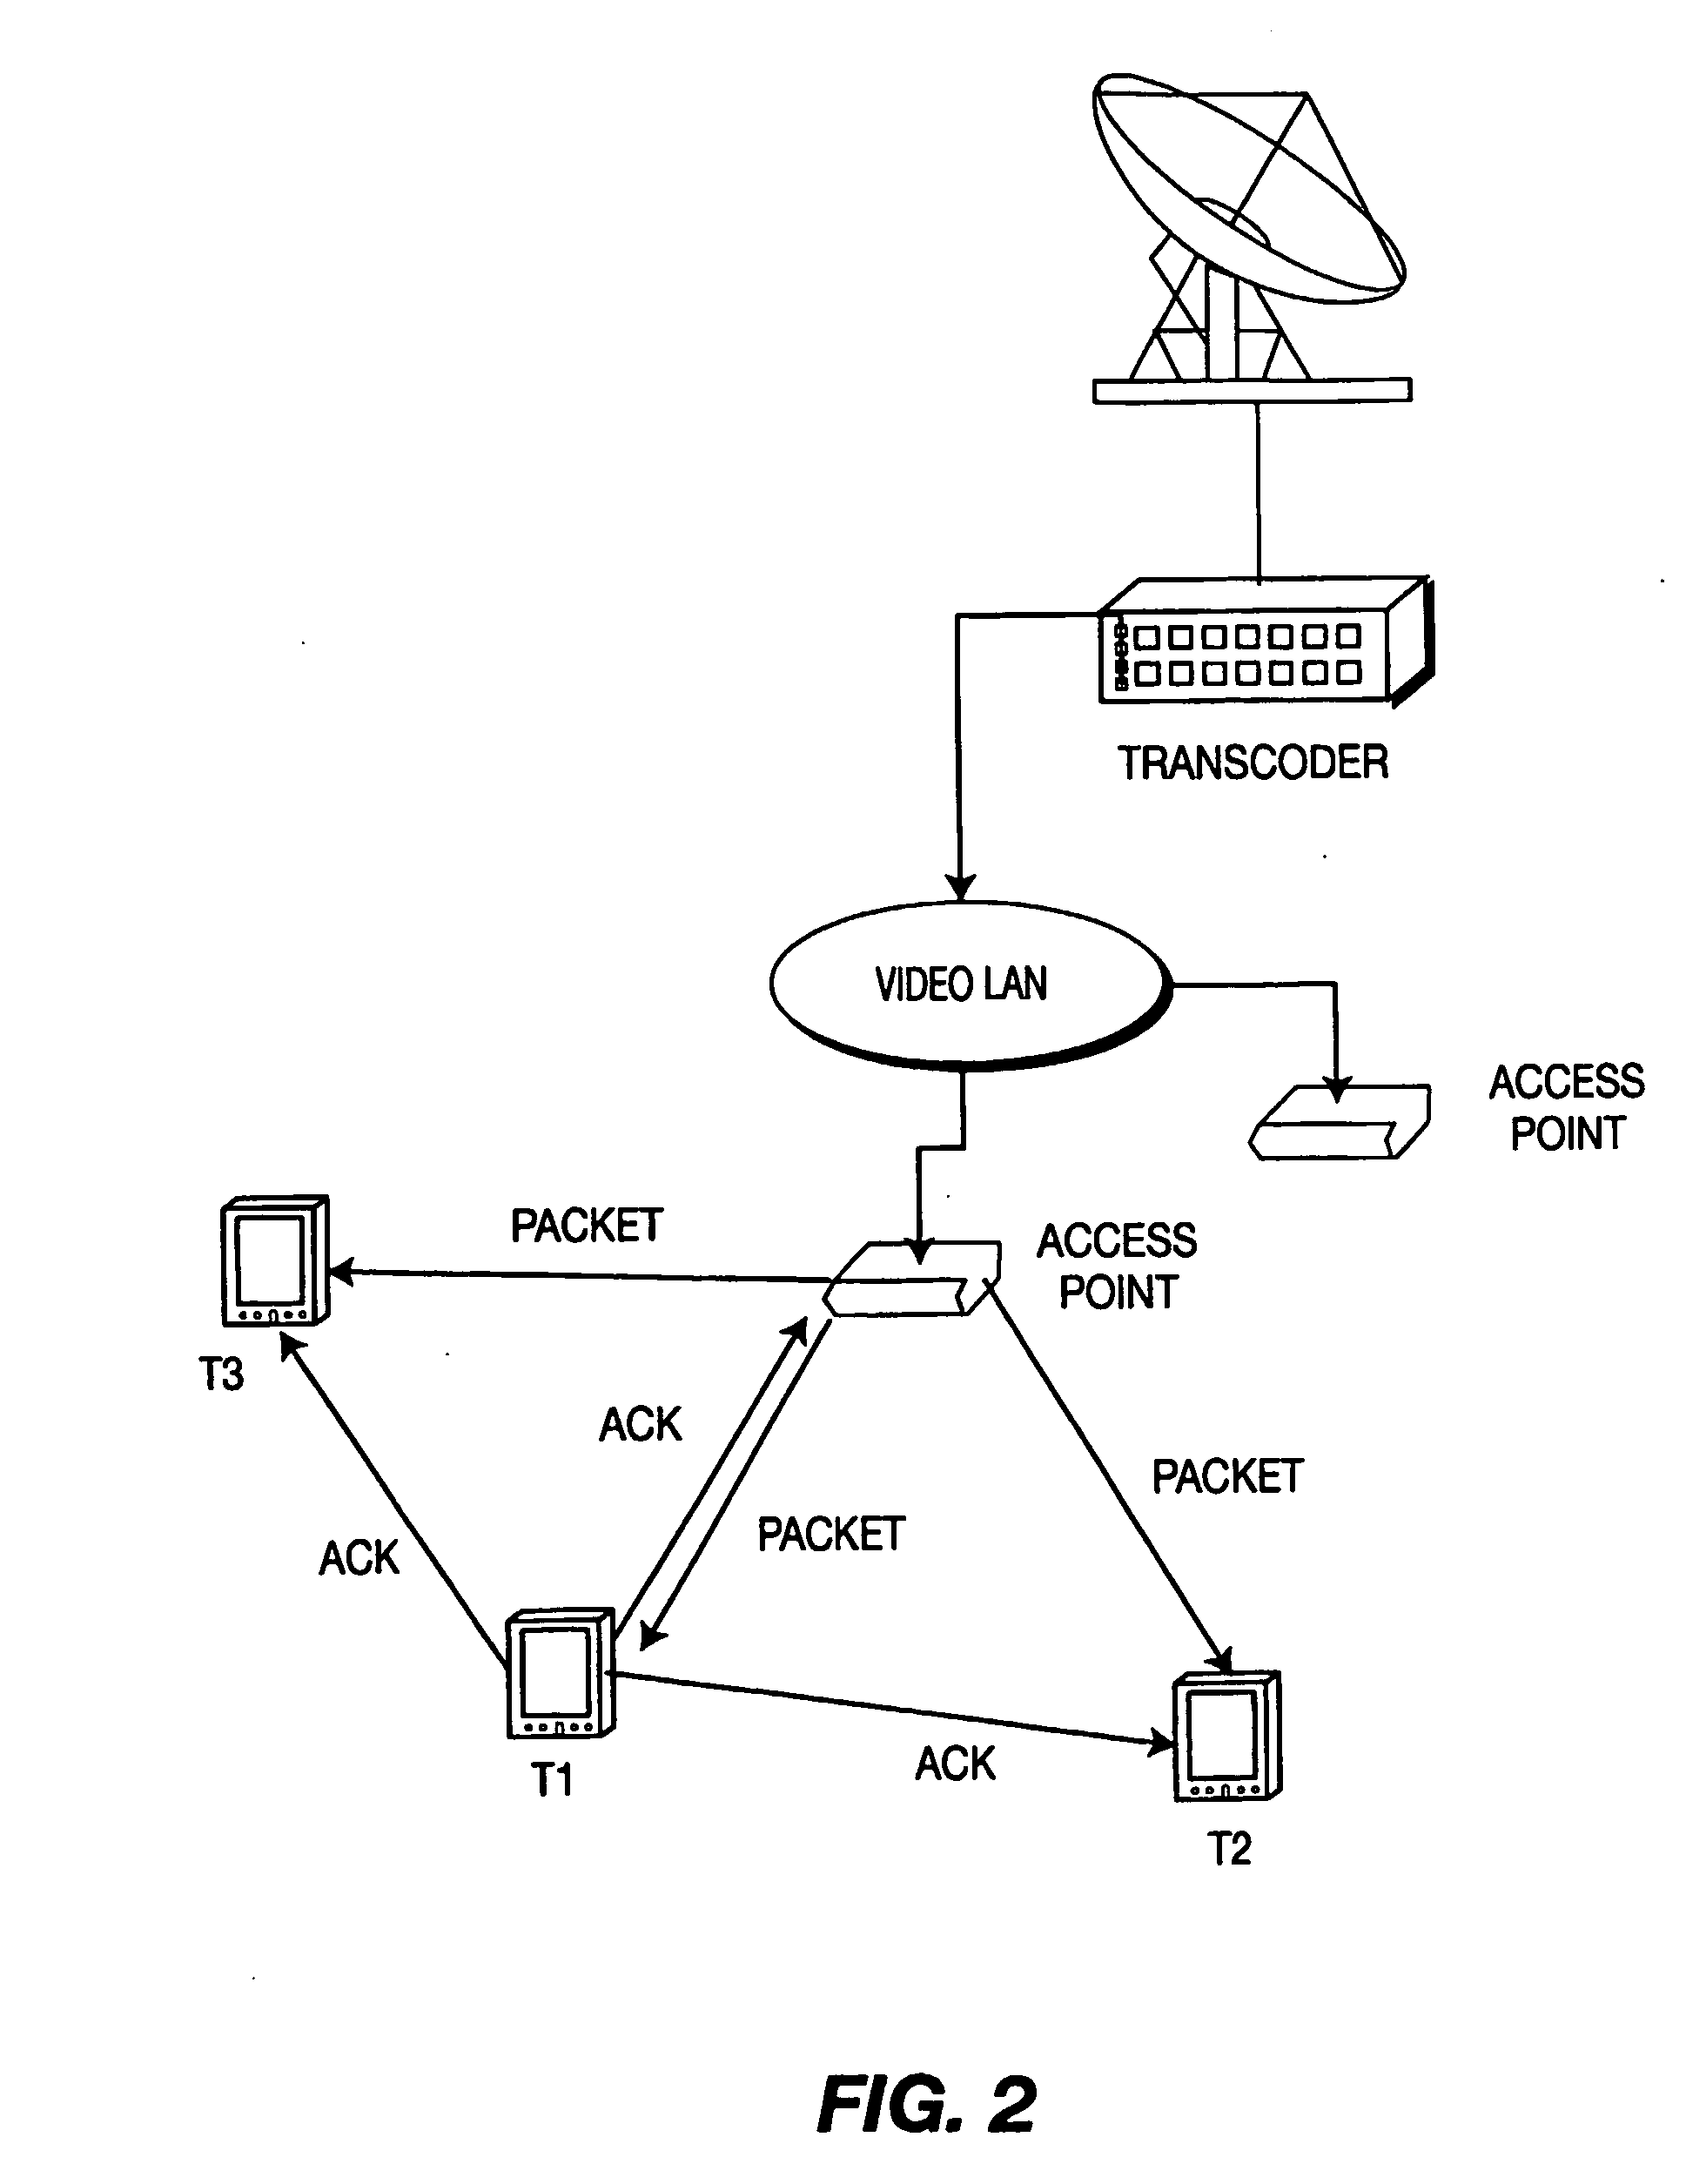 Multicast over unicast in a network